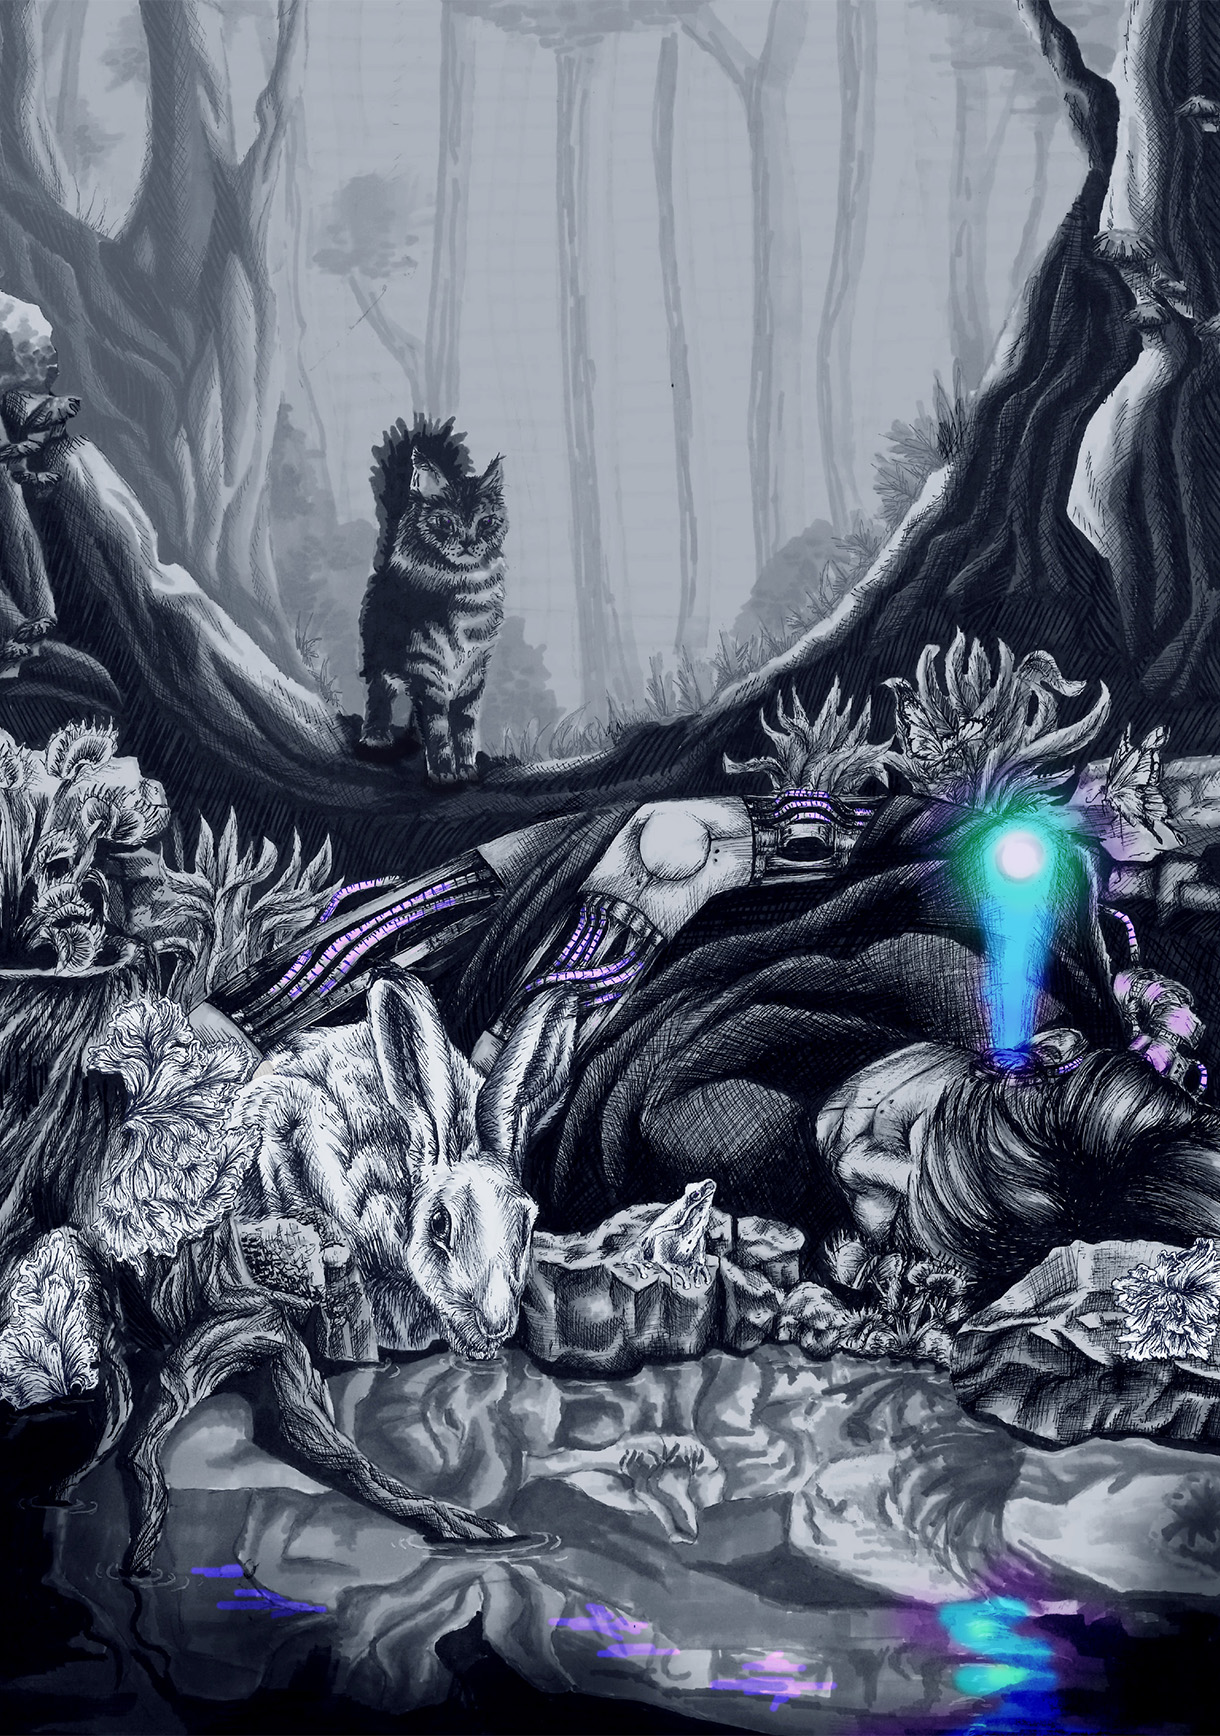 Black and white illustration indicating a mechanical being laying near water, surrounded by plants and forest animals.